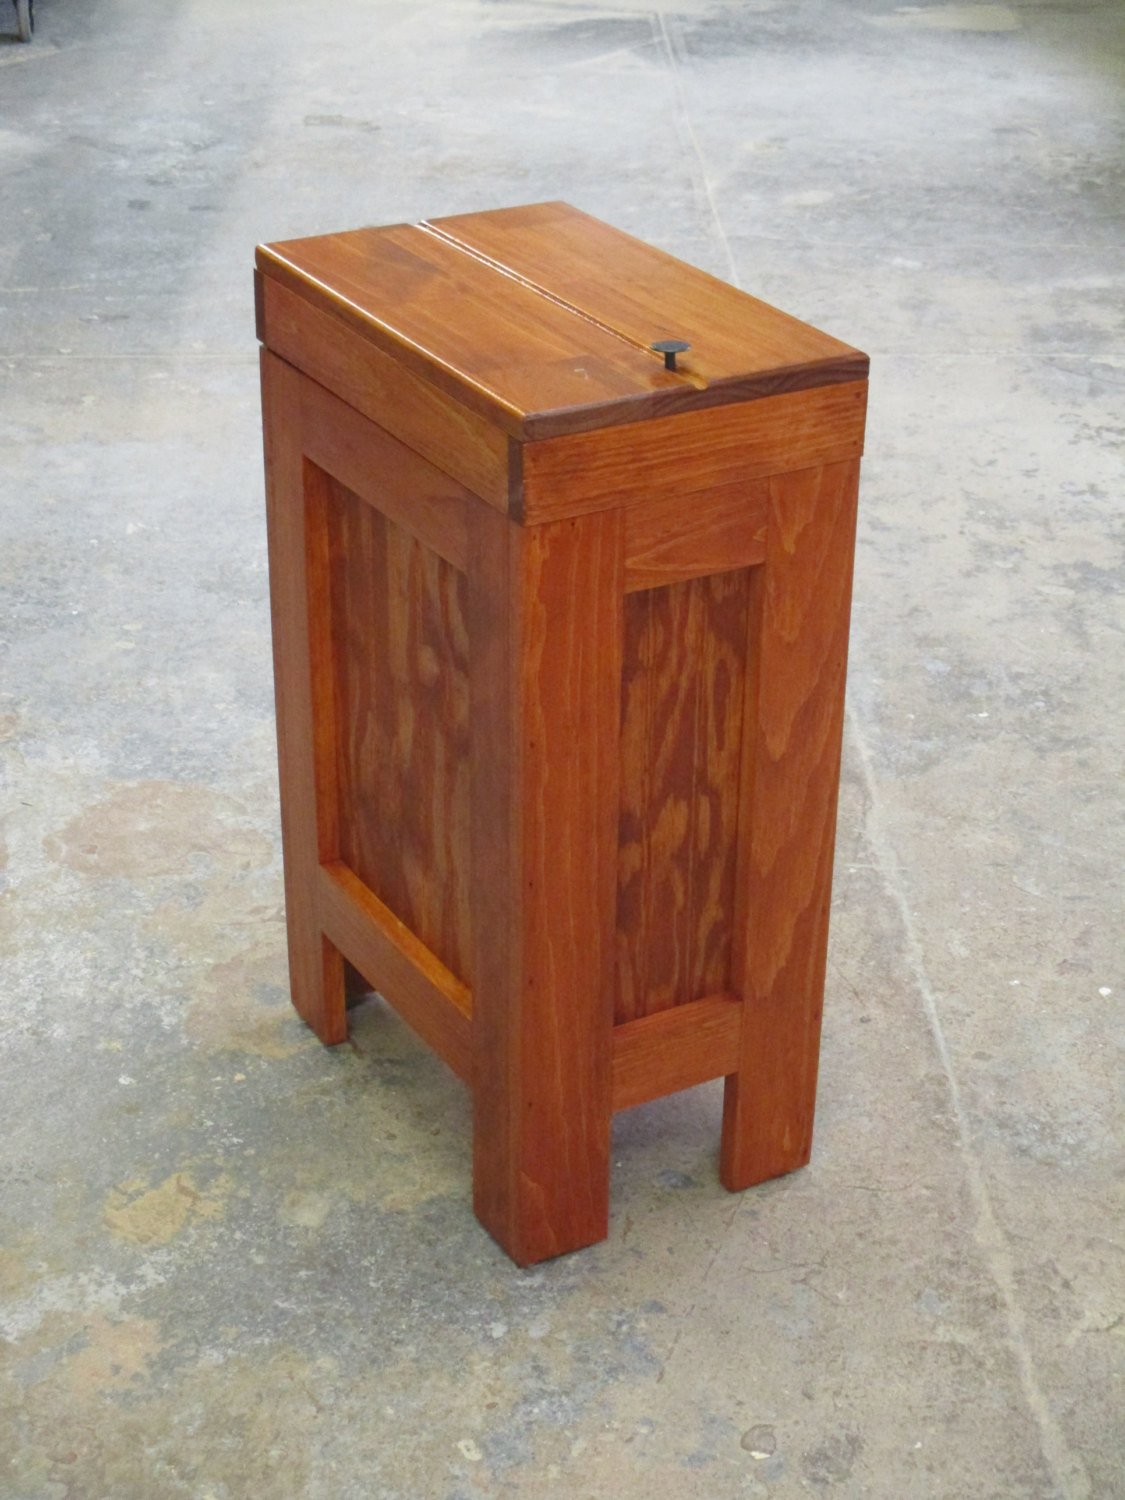 Kitchen trash cans made of wood